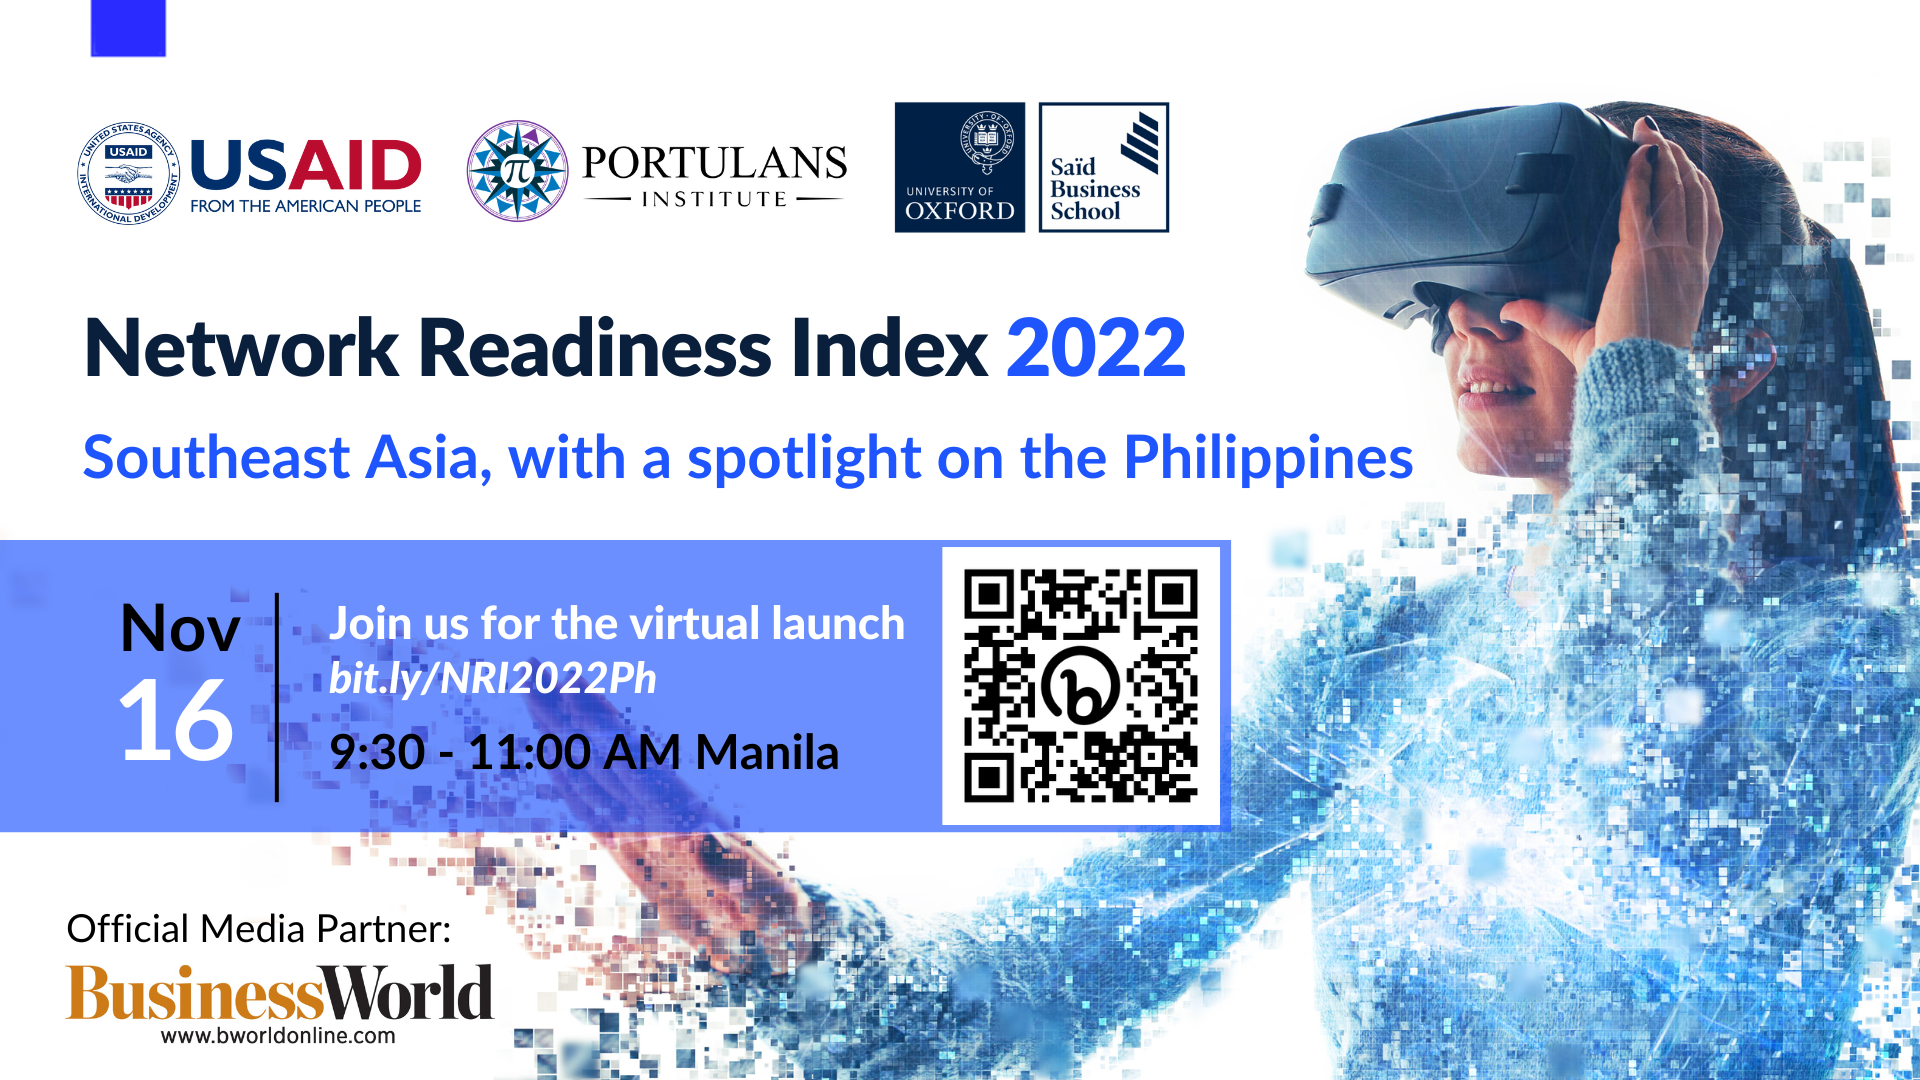 Network Readiness Index 2022: Southeast Asia Launch